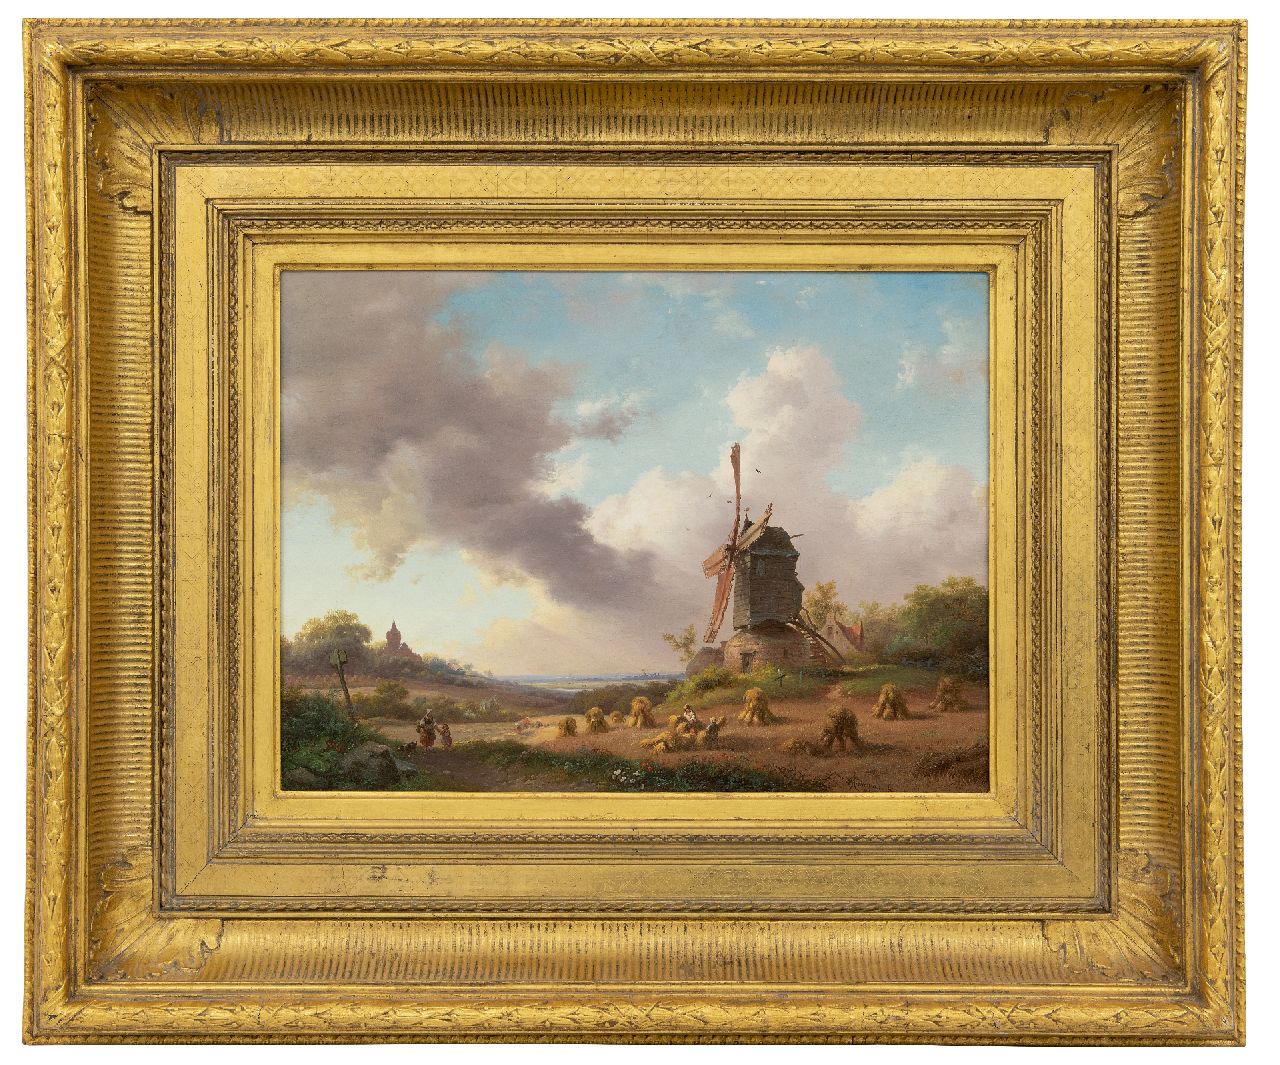 Kruseman F.M.  | Frederik Marinus Kruseman | Paintings offered for sale | Harvest month, August, oil on panel 28.5 x 38.5 cm, signed l.r. and dated 1850